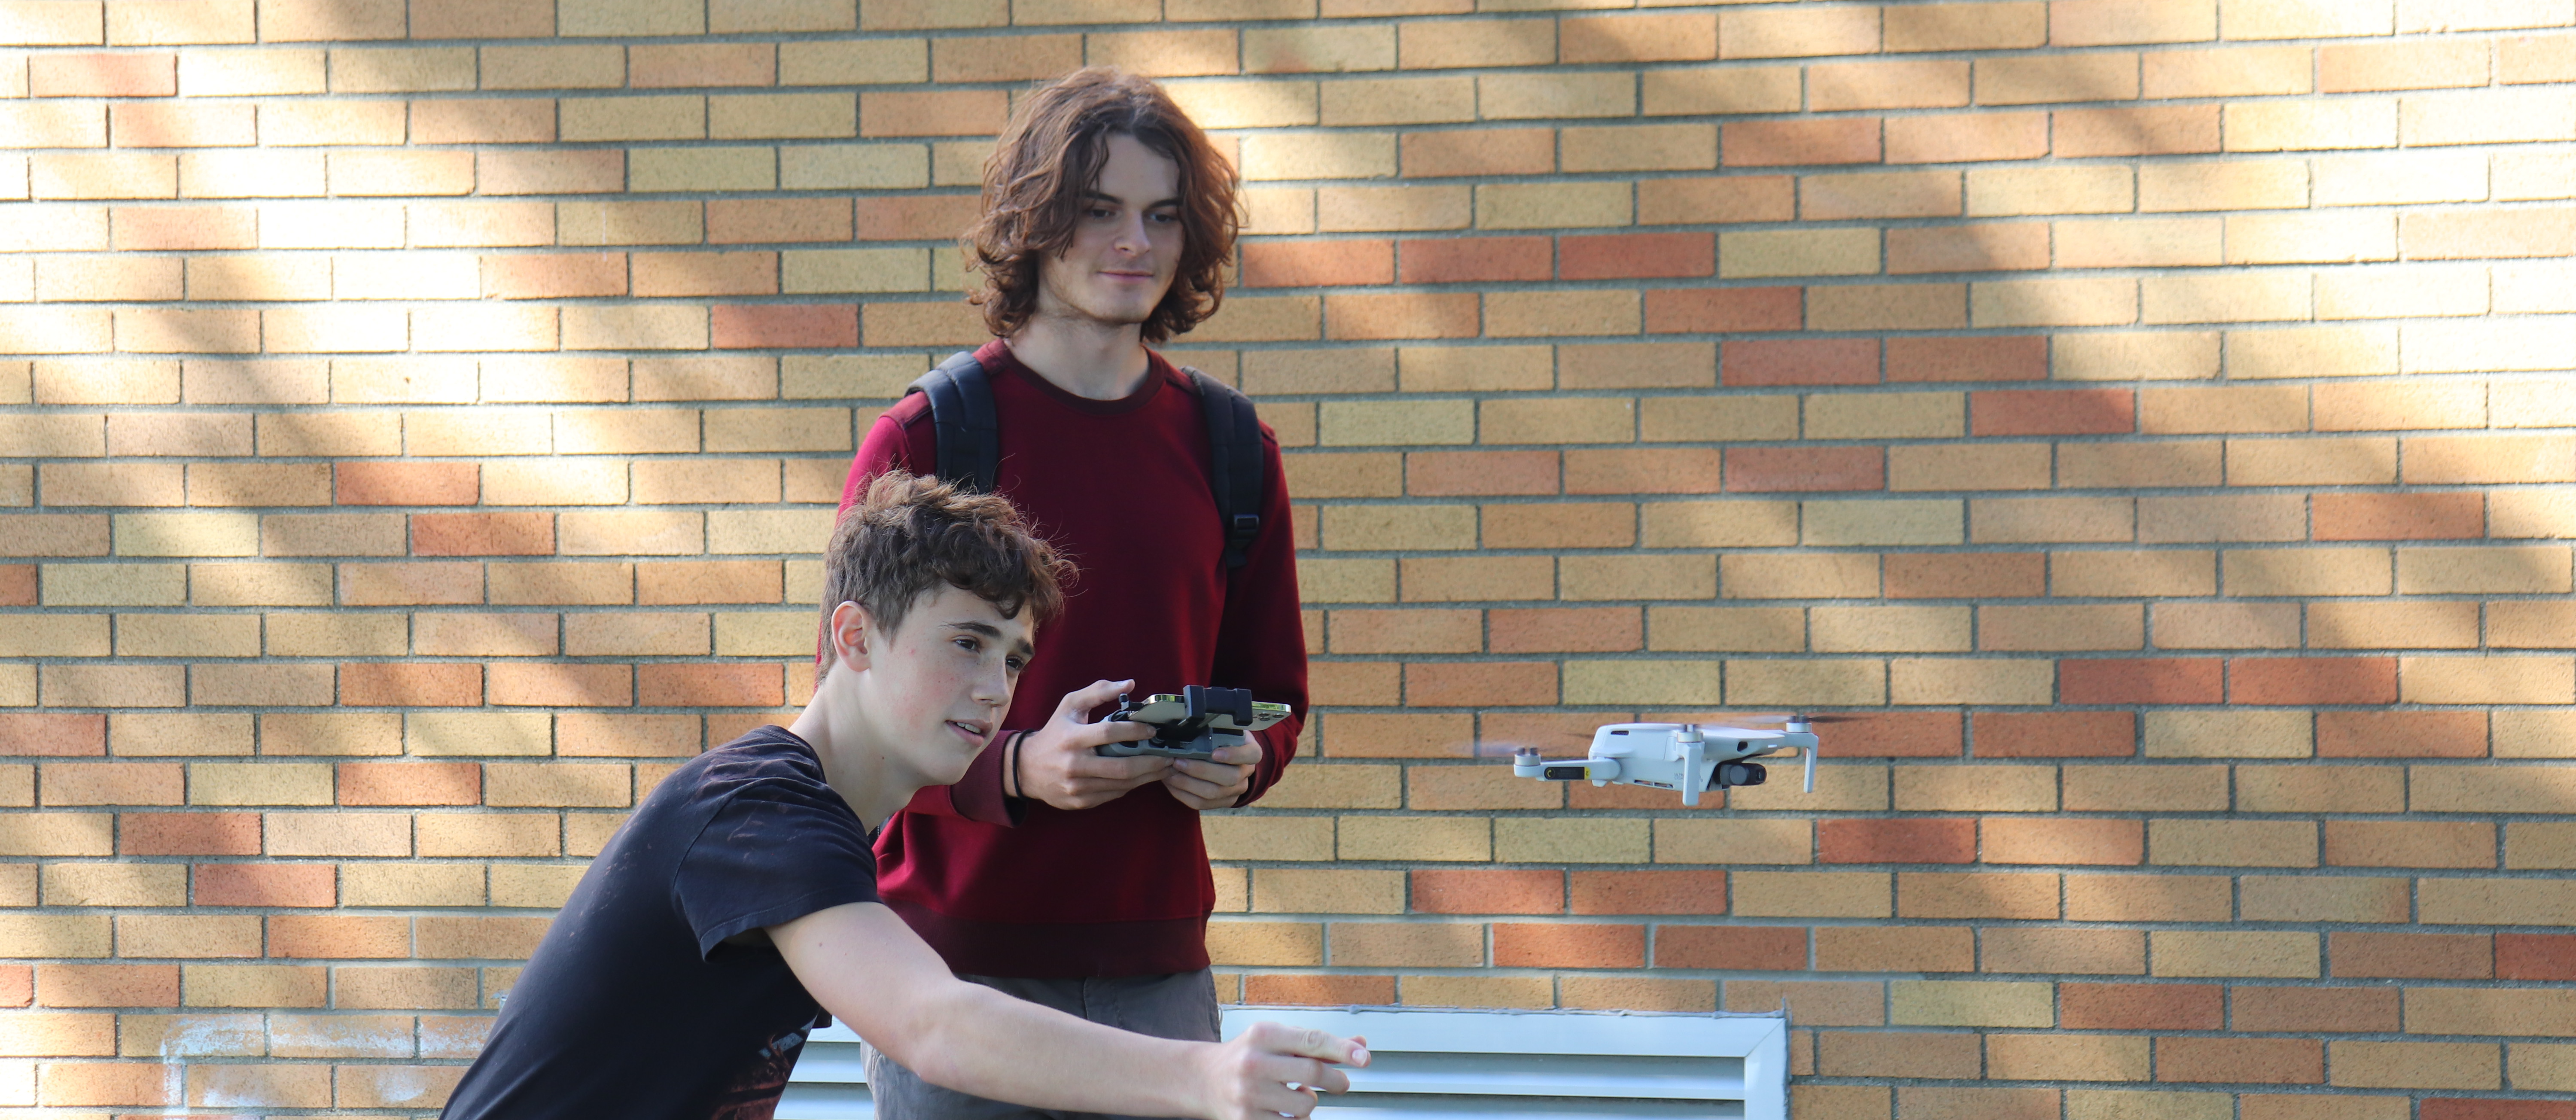 Harbor High students, Ivan and Dylan, utilize the school's drone for their video project.